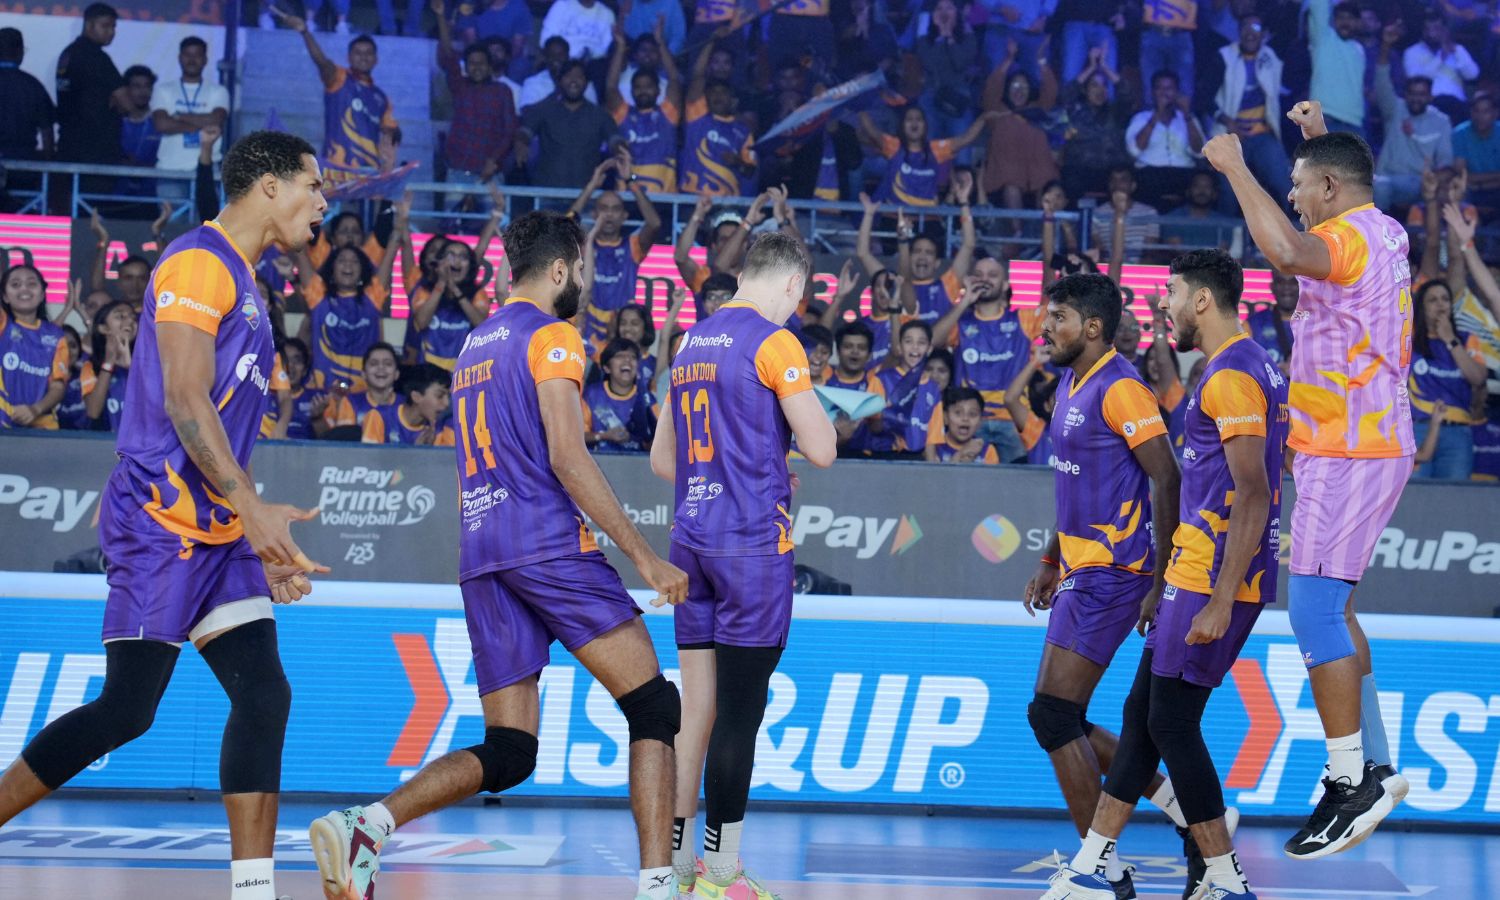 PVL 2023 LIVE: Mumbai Meteors aim to seal semifinal slot, face Kochi Blue Spikers in Prime Volleyball League 2023 - Follow Mumbai Meteors vs Kochi Blue Spikers LIVE updates